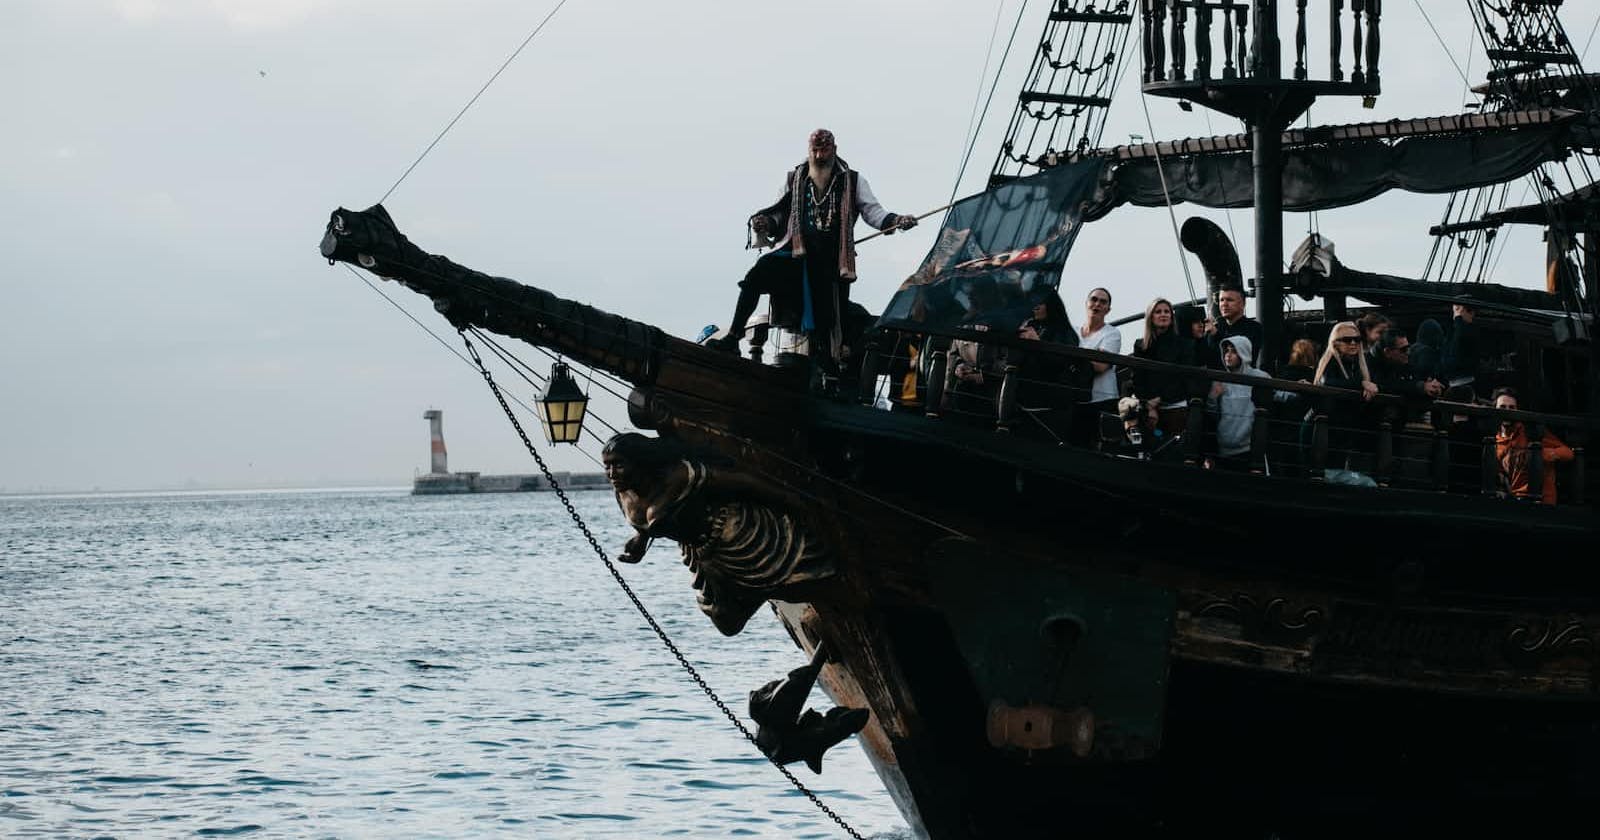 Why Piracy is a Loaded Term